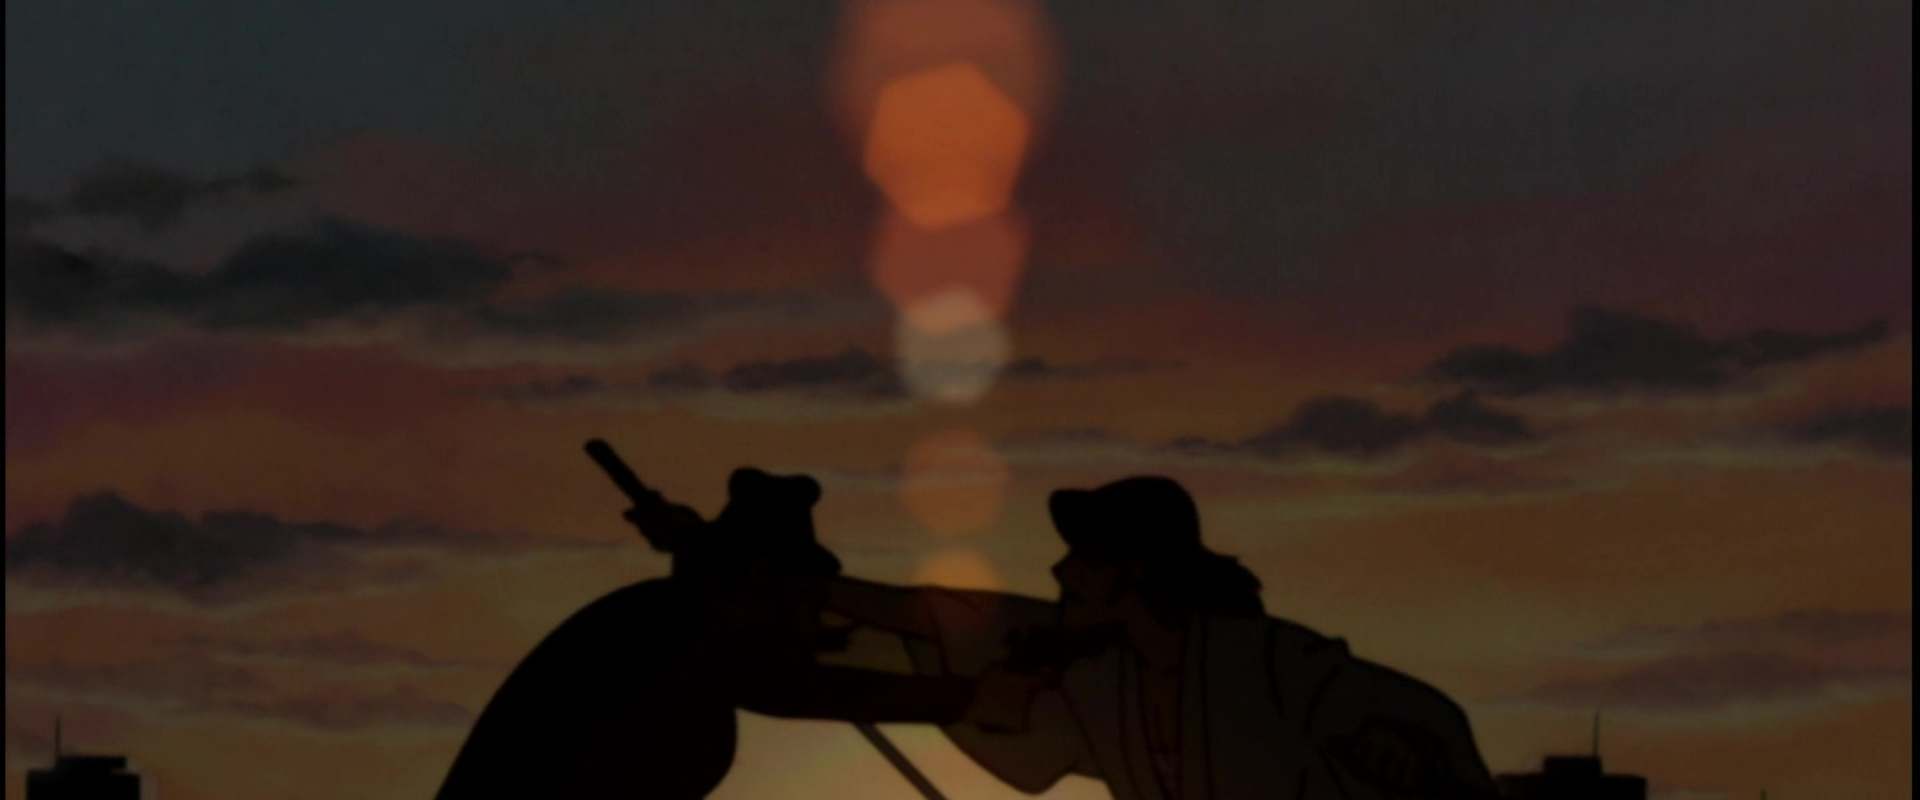 Lupin the Third: Episode 0: First Contact background 1